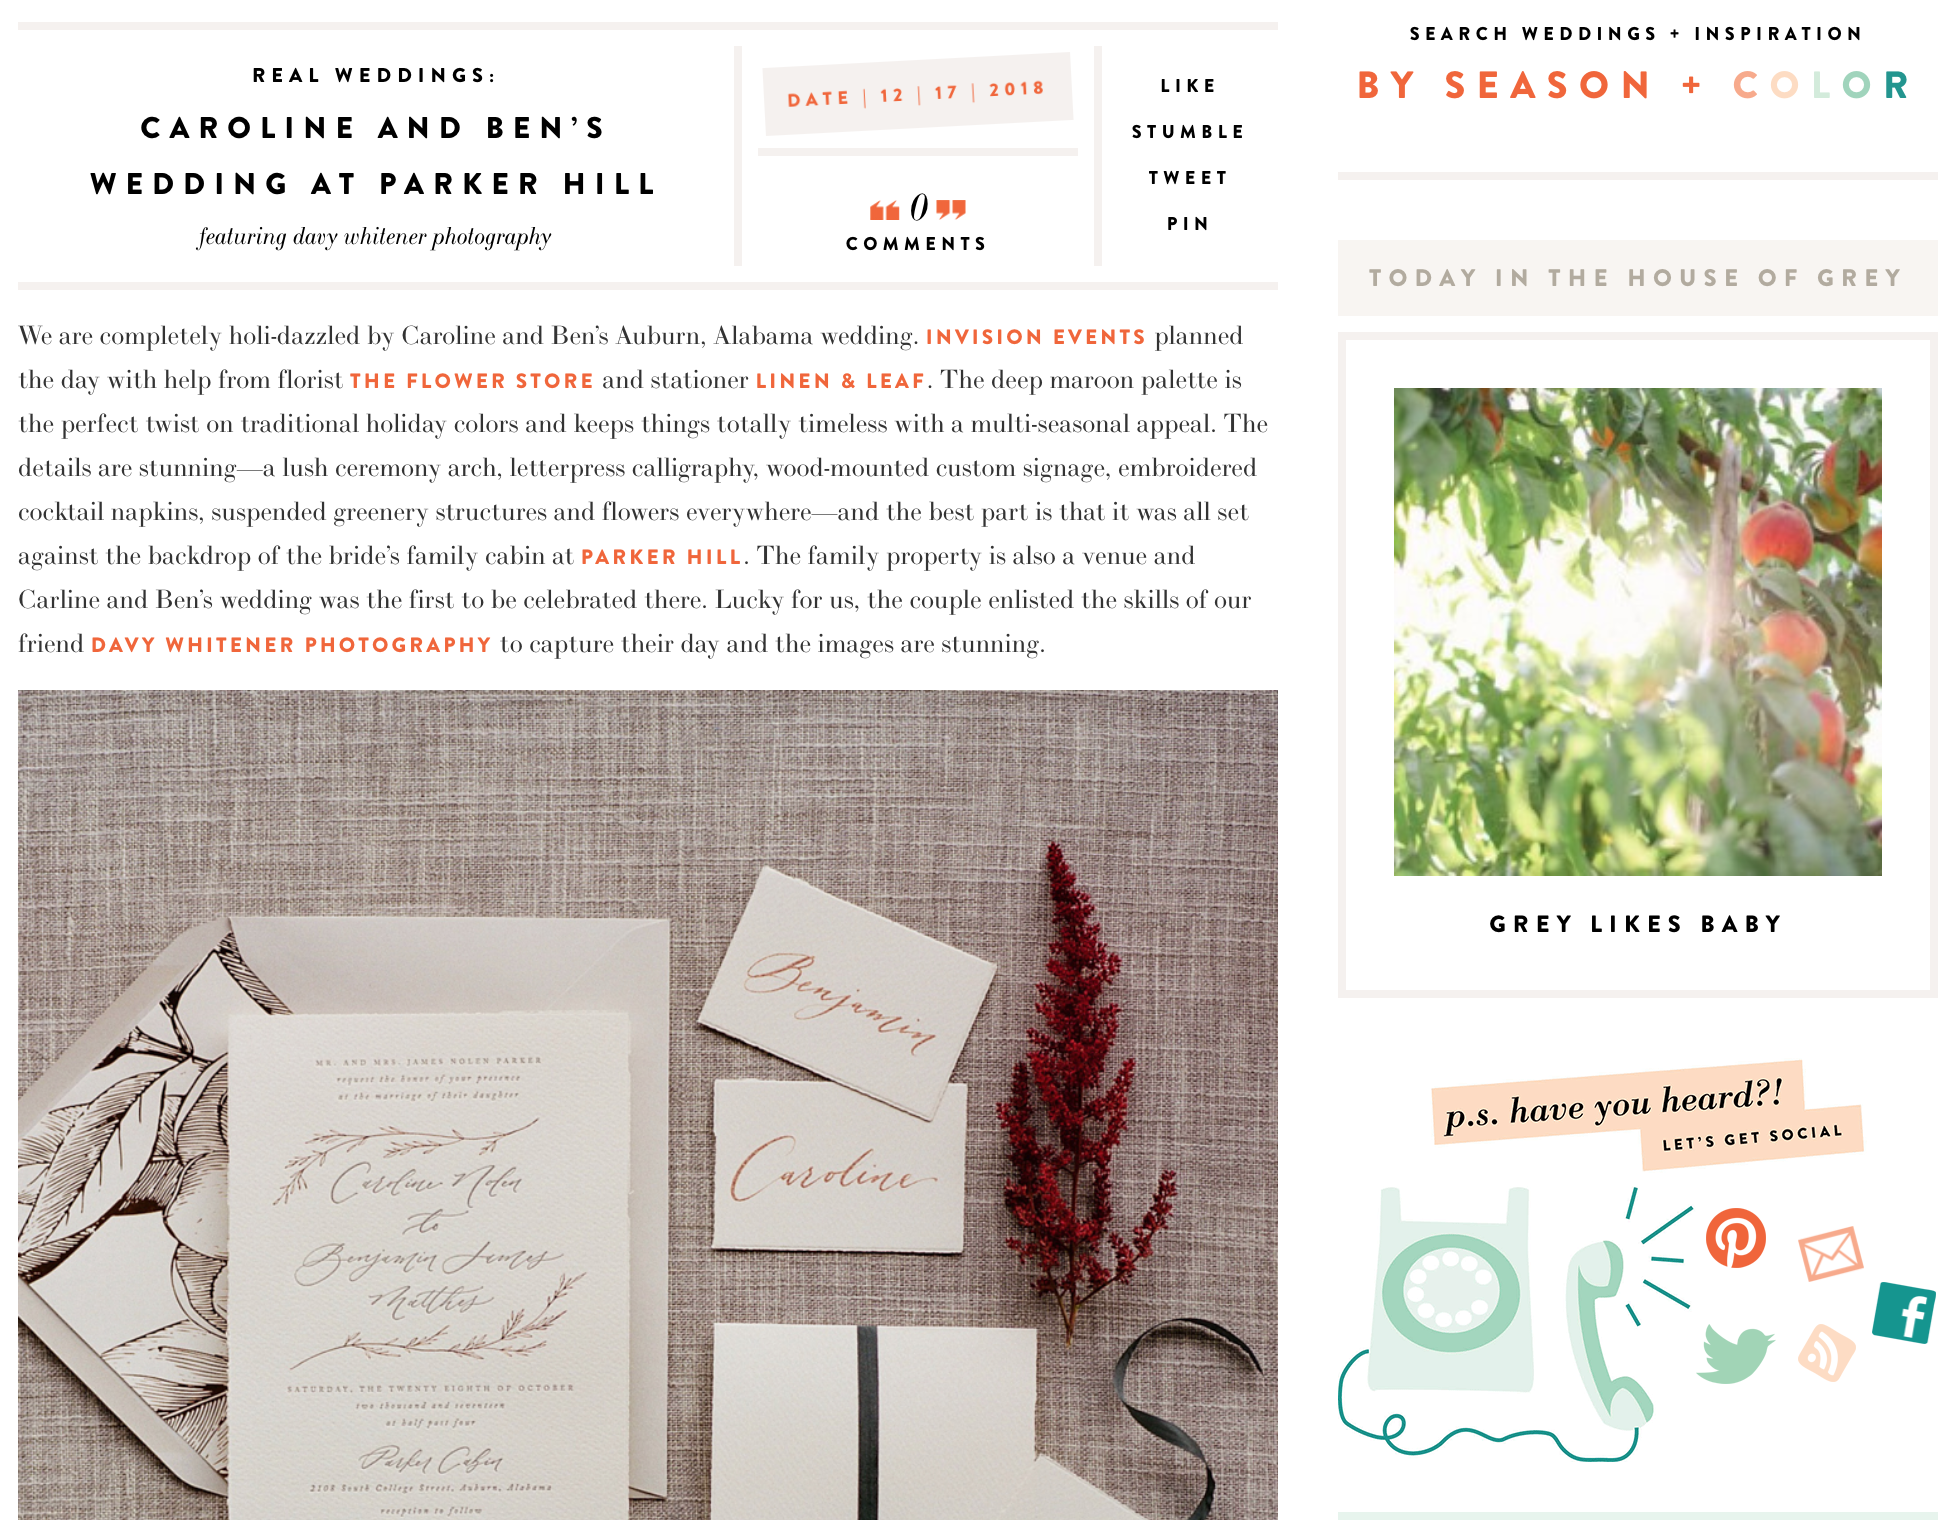 Grey Likes Weddings features Invision Events wedding in Auburn, Alabama